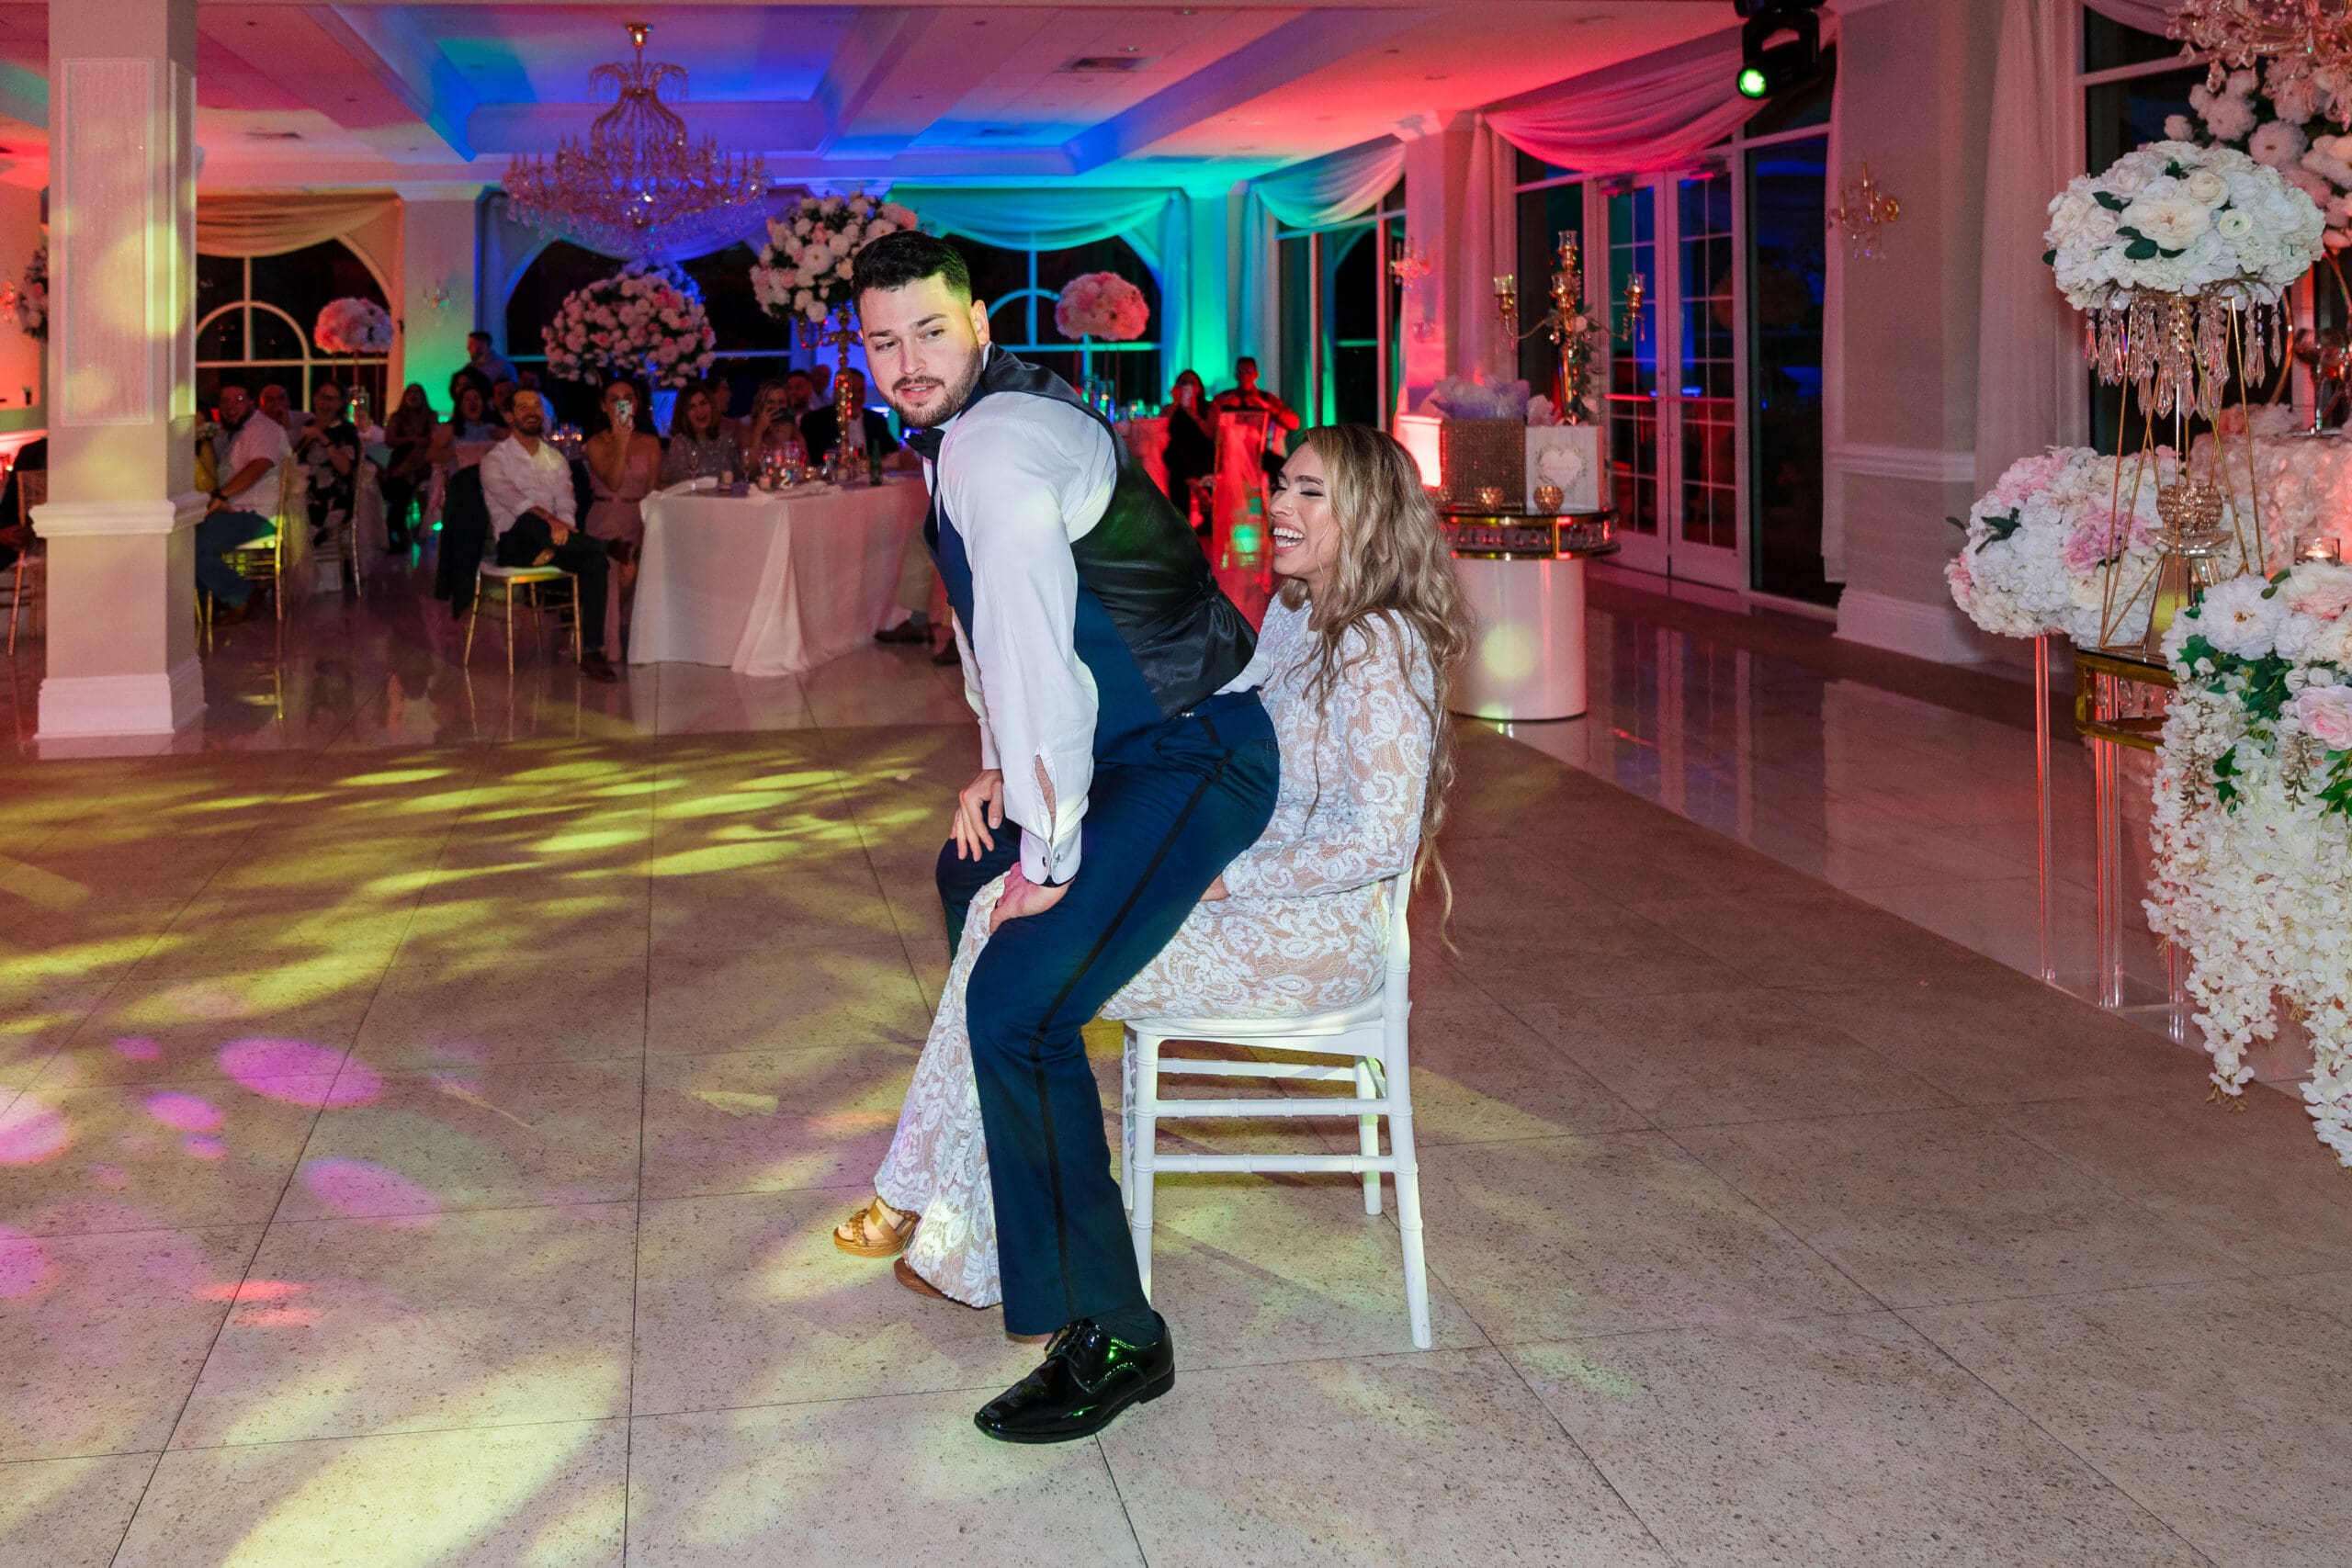 Jazer twerking for Jenn in the reception hall, with Jenn cracking up in laughter, showcasing the playful and loving dynamic of the couple, captured by Jerzy Nieves at the Crystal Ballroom.